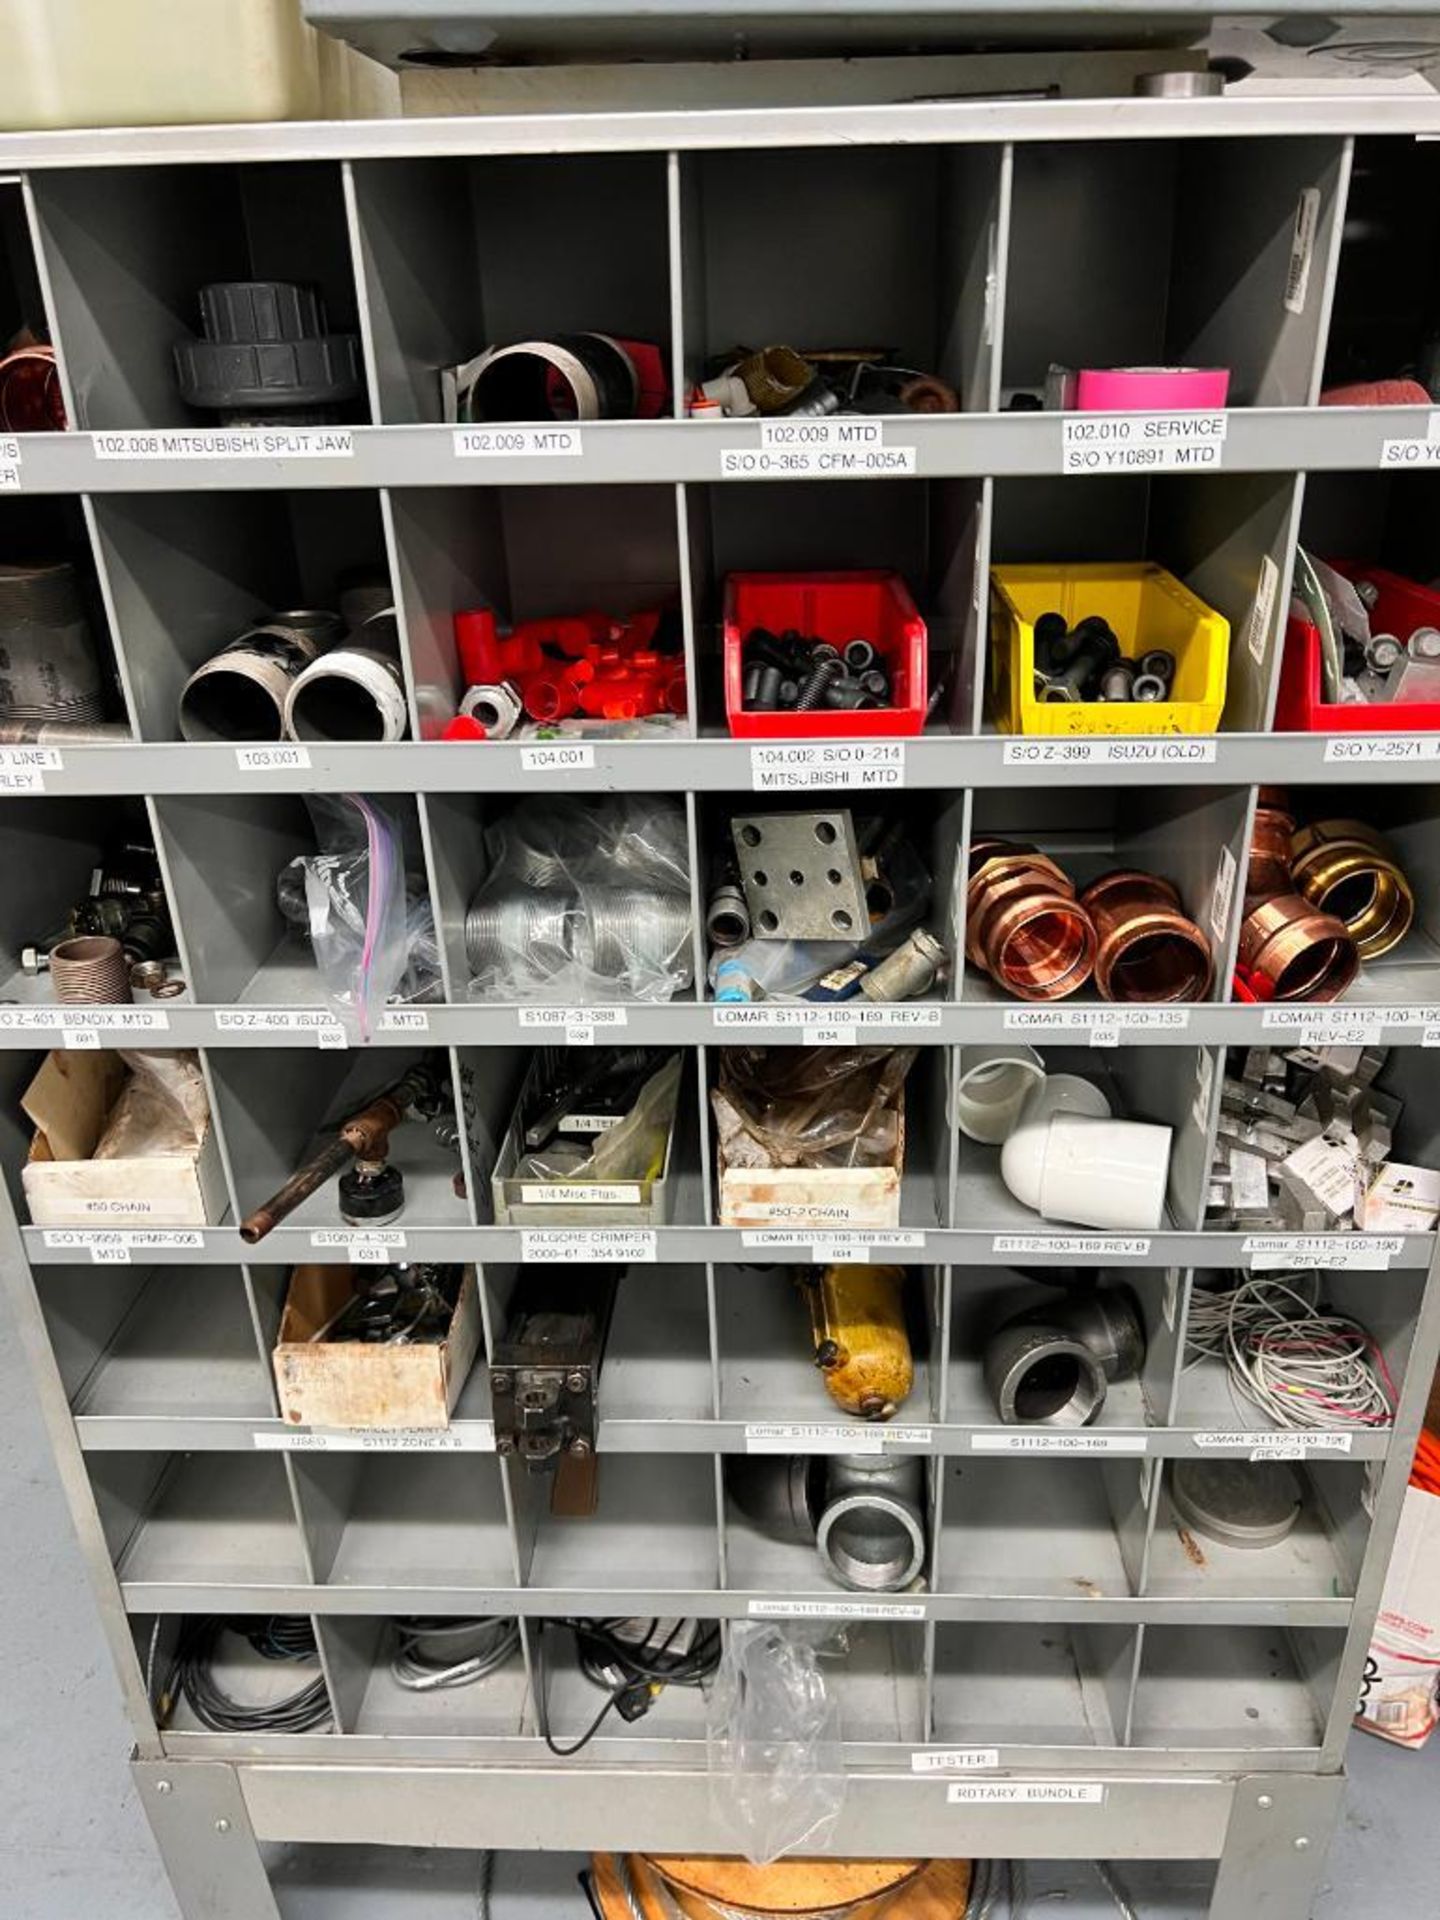 (28) Shelves of Assorted Parts, VERY LARGE LOT Consisting of MRO, Drives, Valves, PLC, Nuts, Bolts, - Image 11 of 67